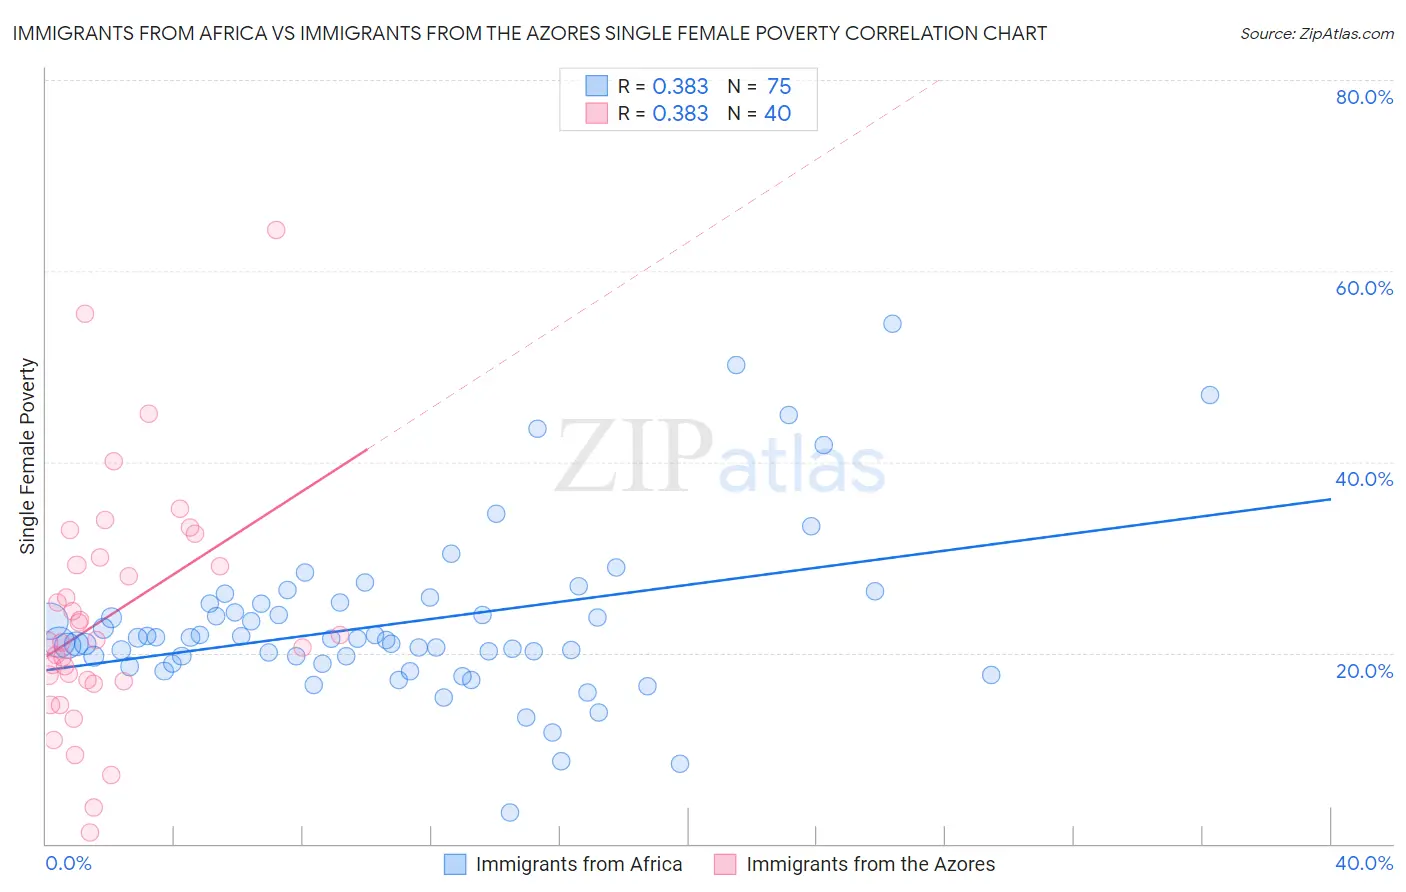 Immigrants from Africa vs Immigrants from the Azores Single Female Poverty